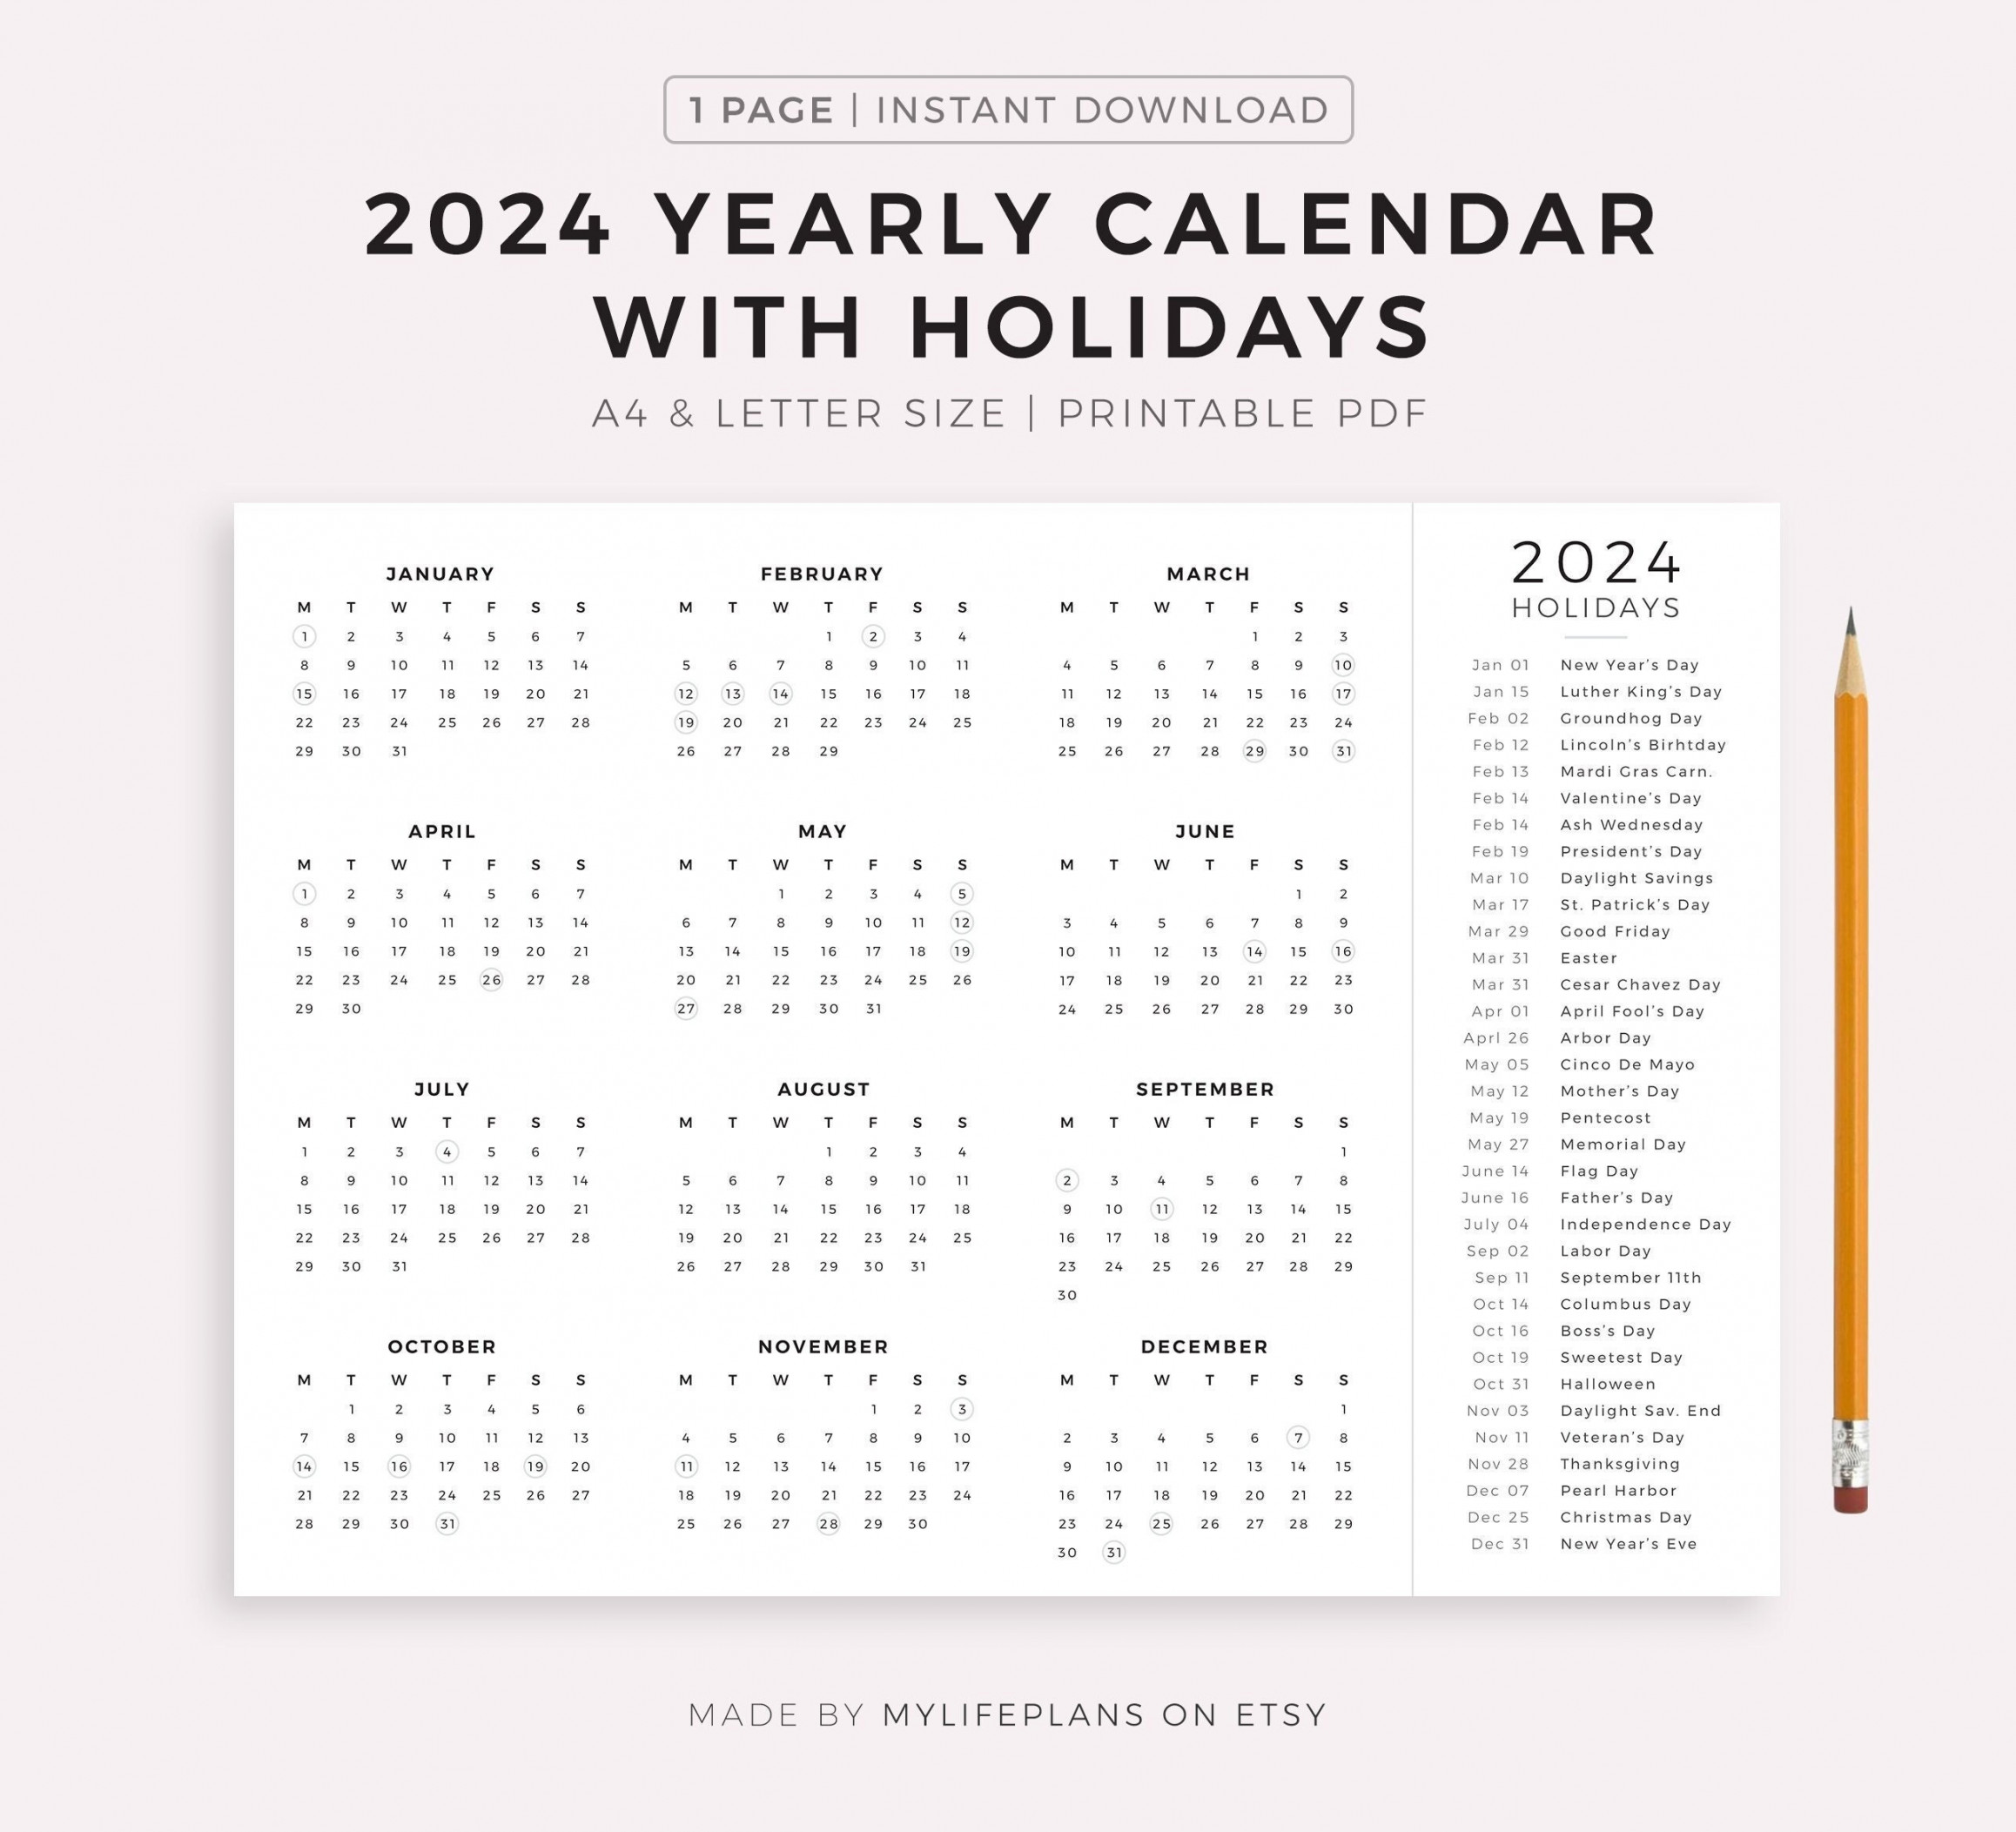 Year Calendar With Holidays on One Page Printable - Etsy Sweden